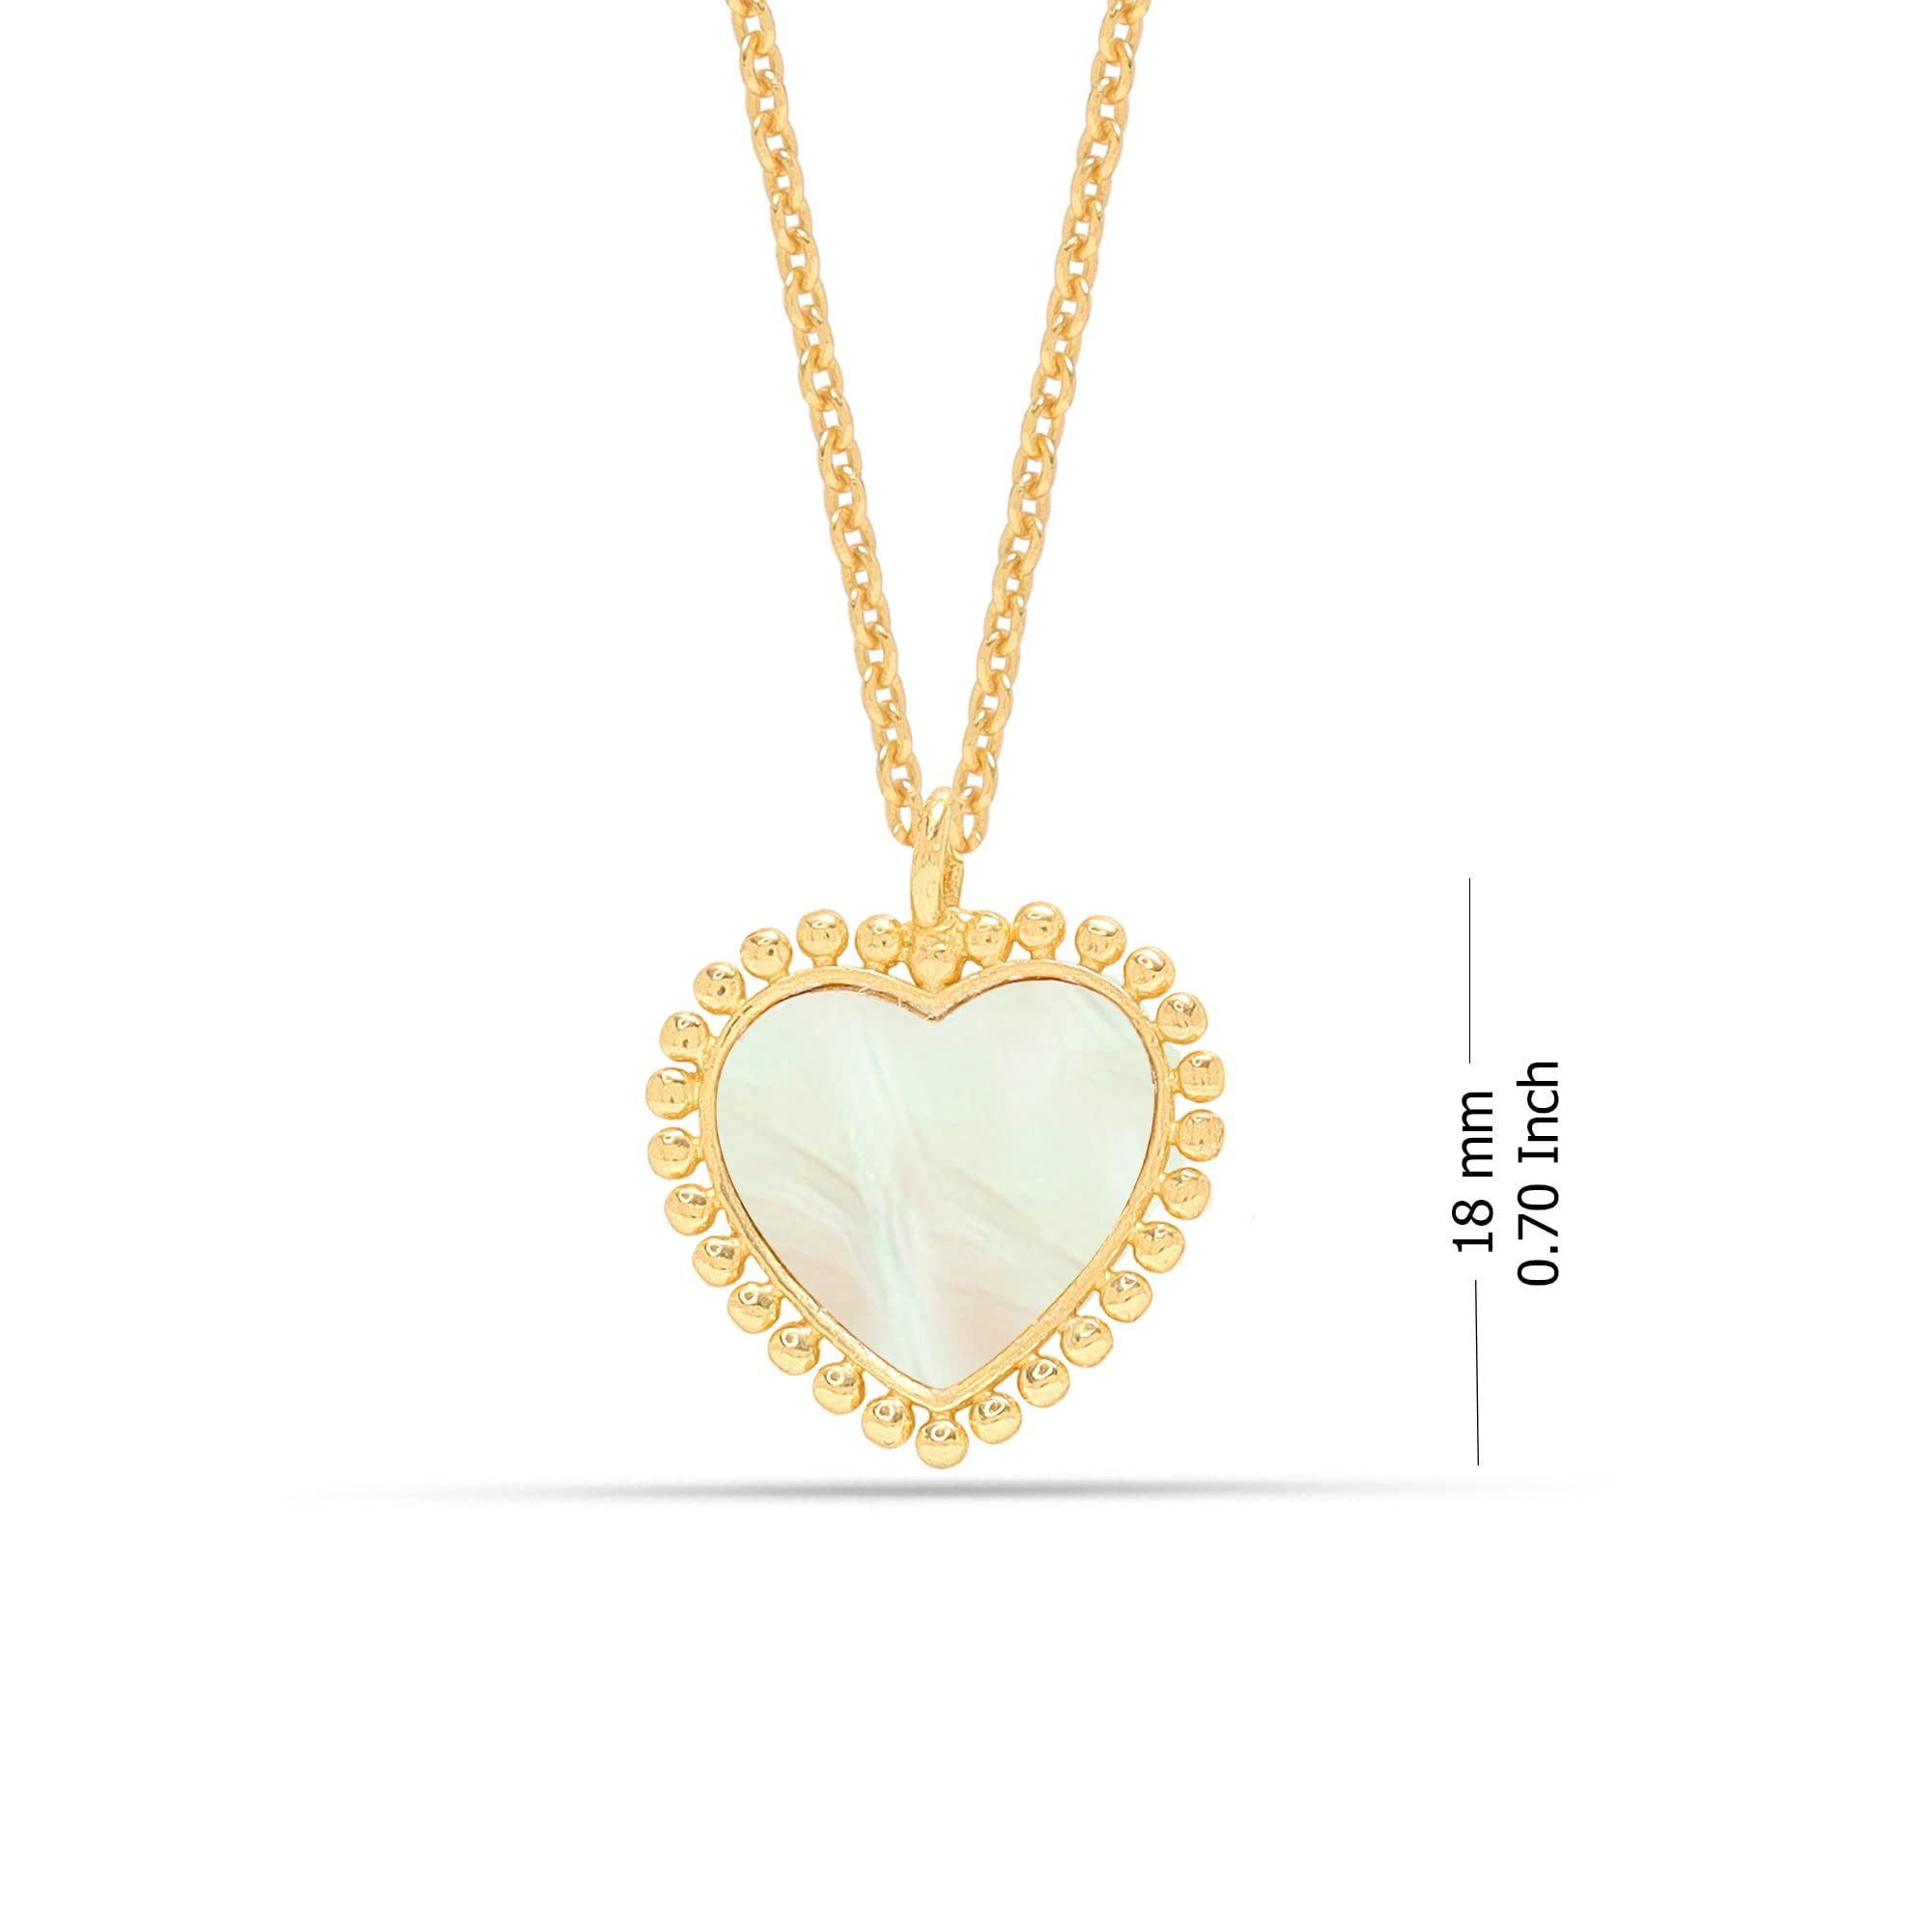 Dogeeel: I will do professionally made heart locket gifs for $5 on